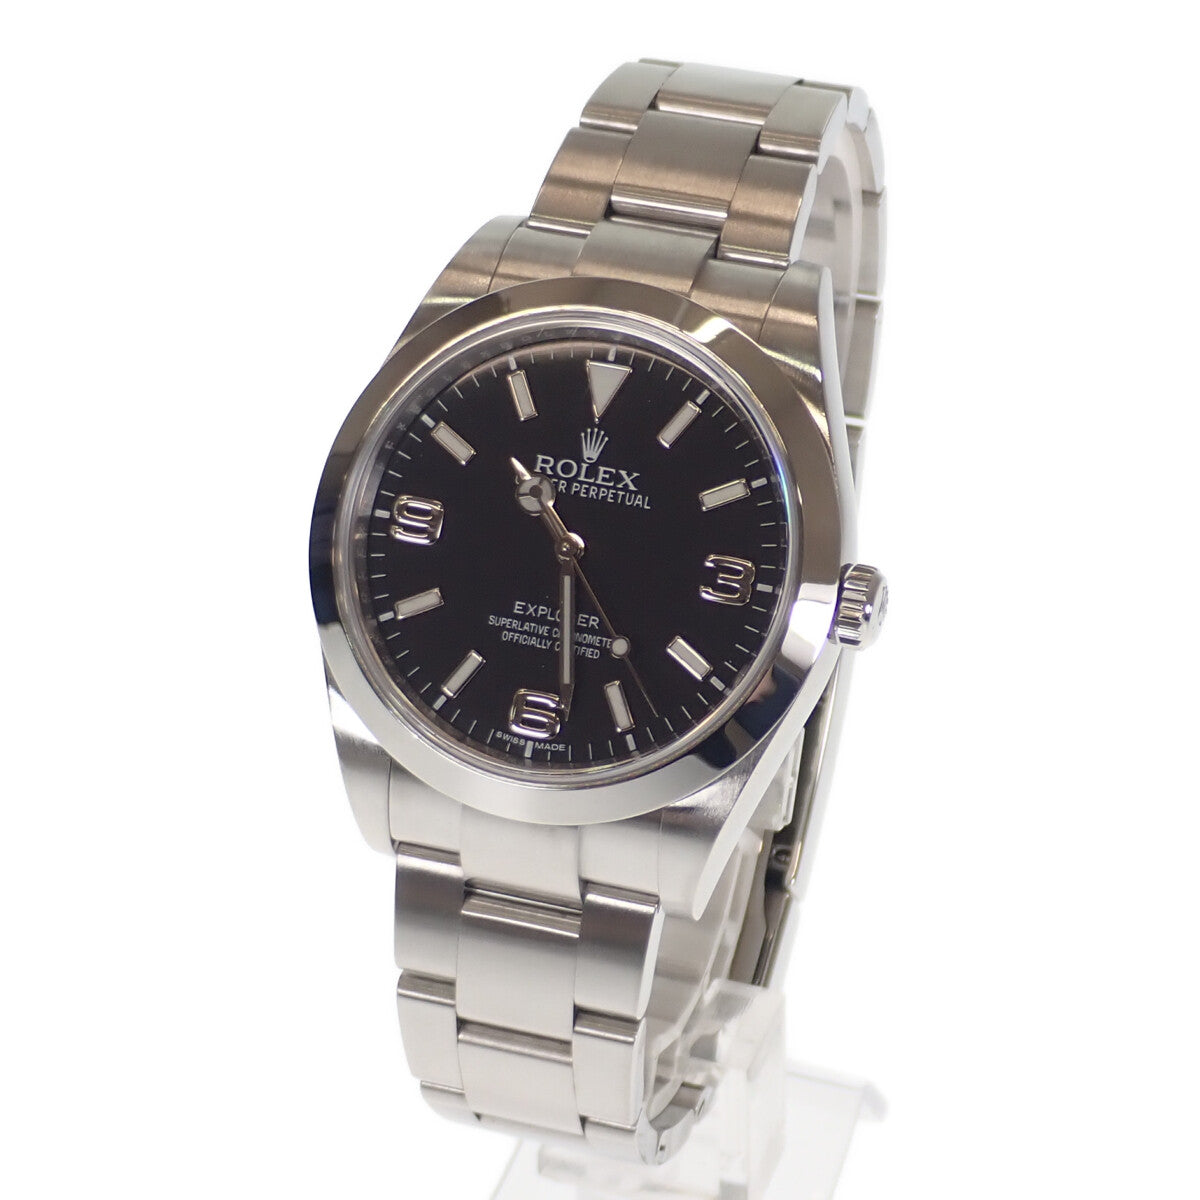 ROLEX Explorer 1 Men's Wristwatch 214270 in Stainless Steel Silver with Blackout Black Dial 214270.0